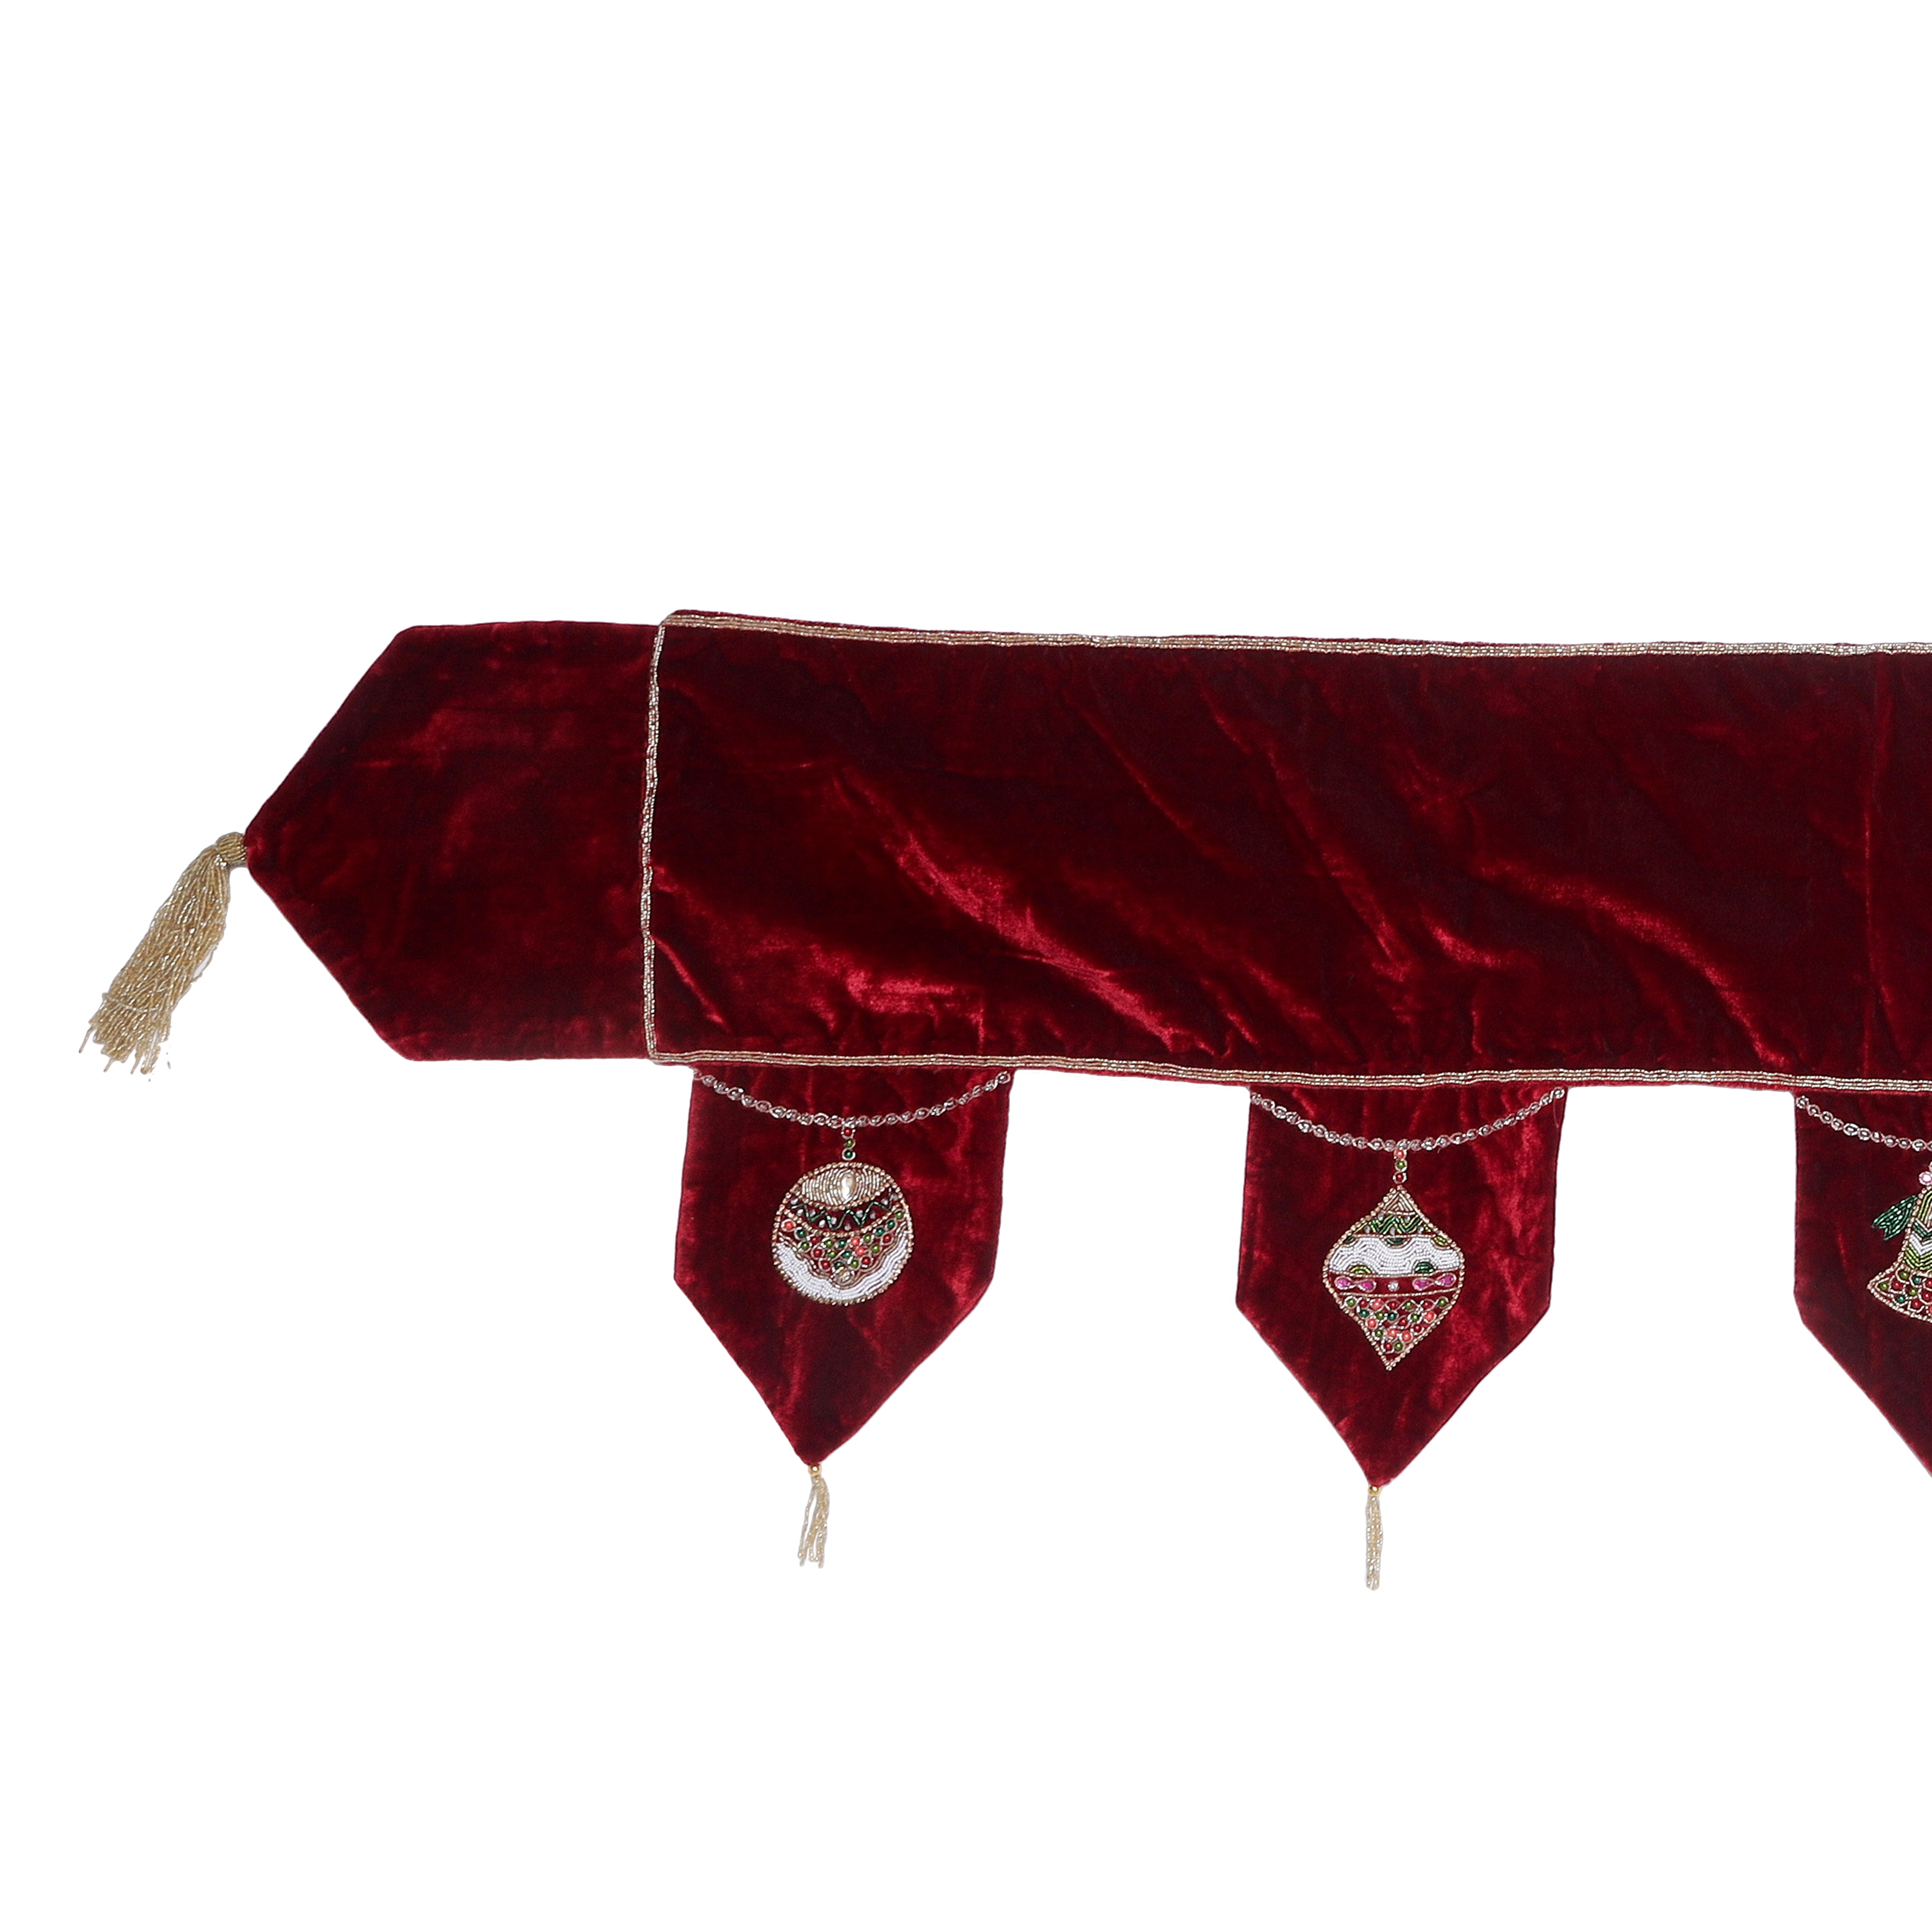 Ornament Red Velvet Christmas Mantle Scarf Available in 2 sizes 60" & 72". Fireplace Christmas Scarf